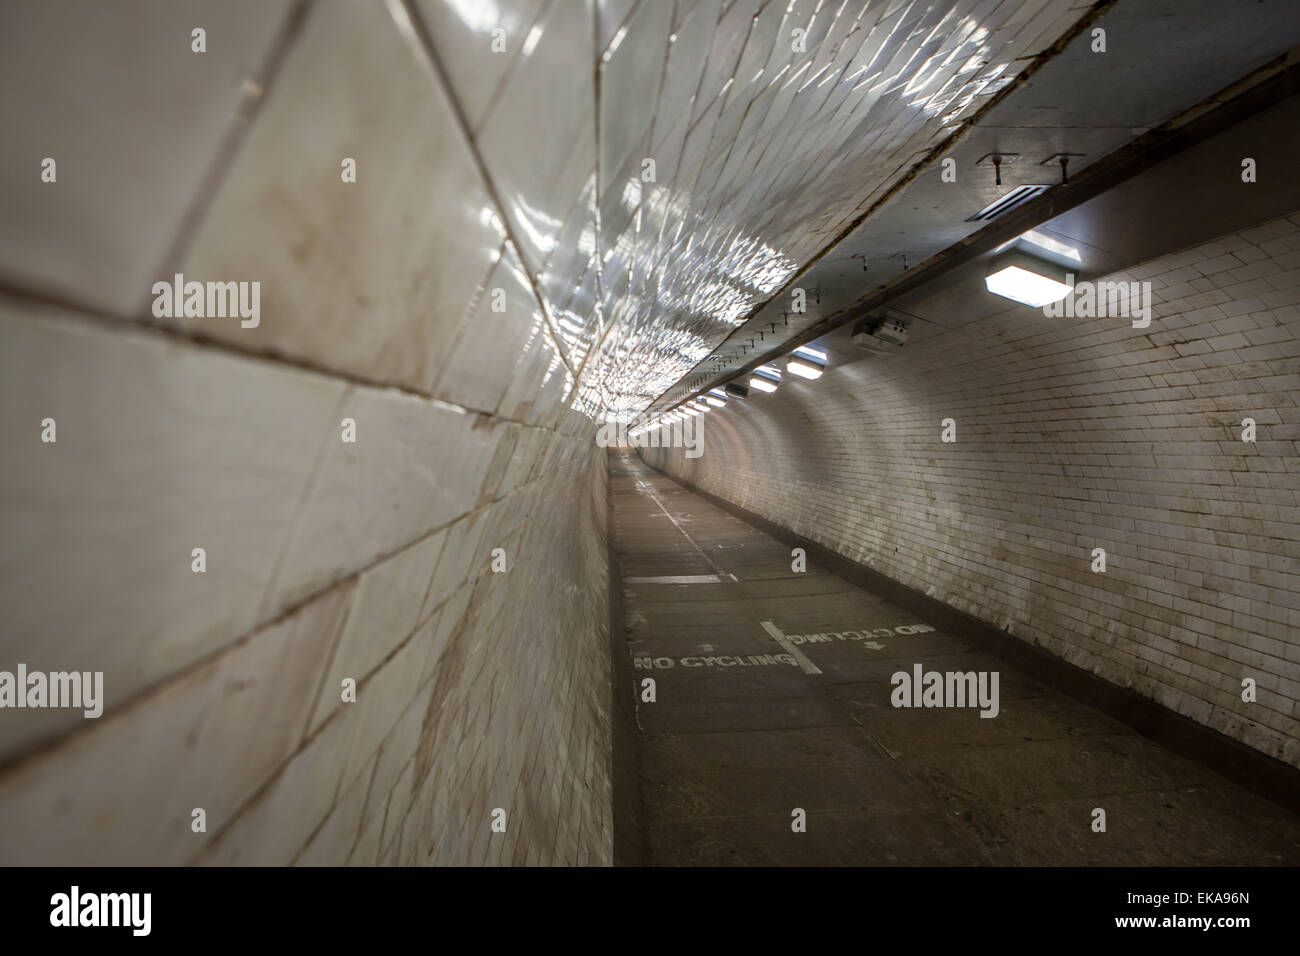 Greenwich foot tunnel is a pedestrian tunnel crossing underneath The Thames River, London Stock Photo